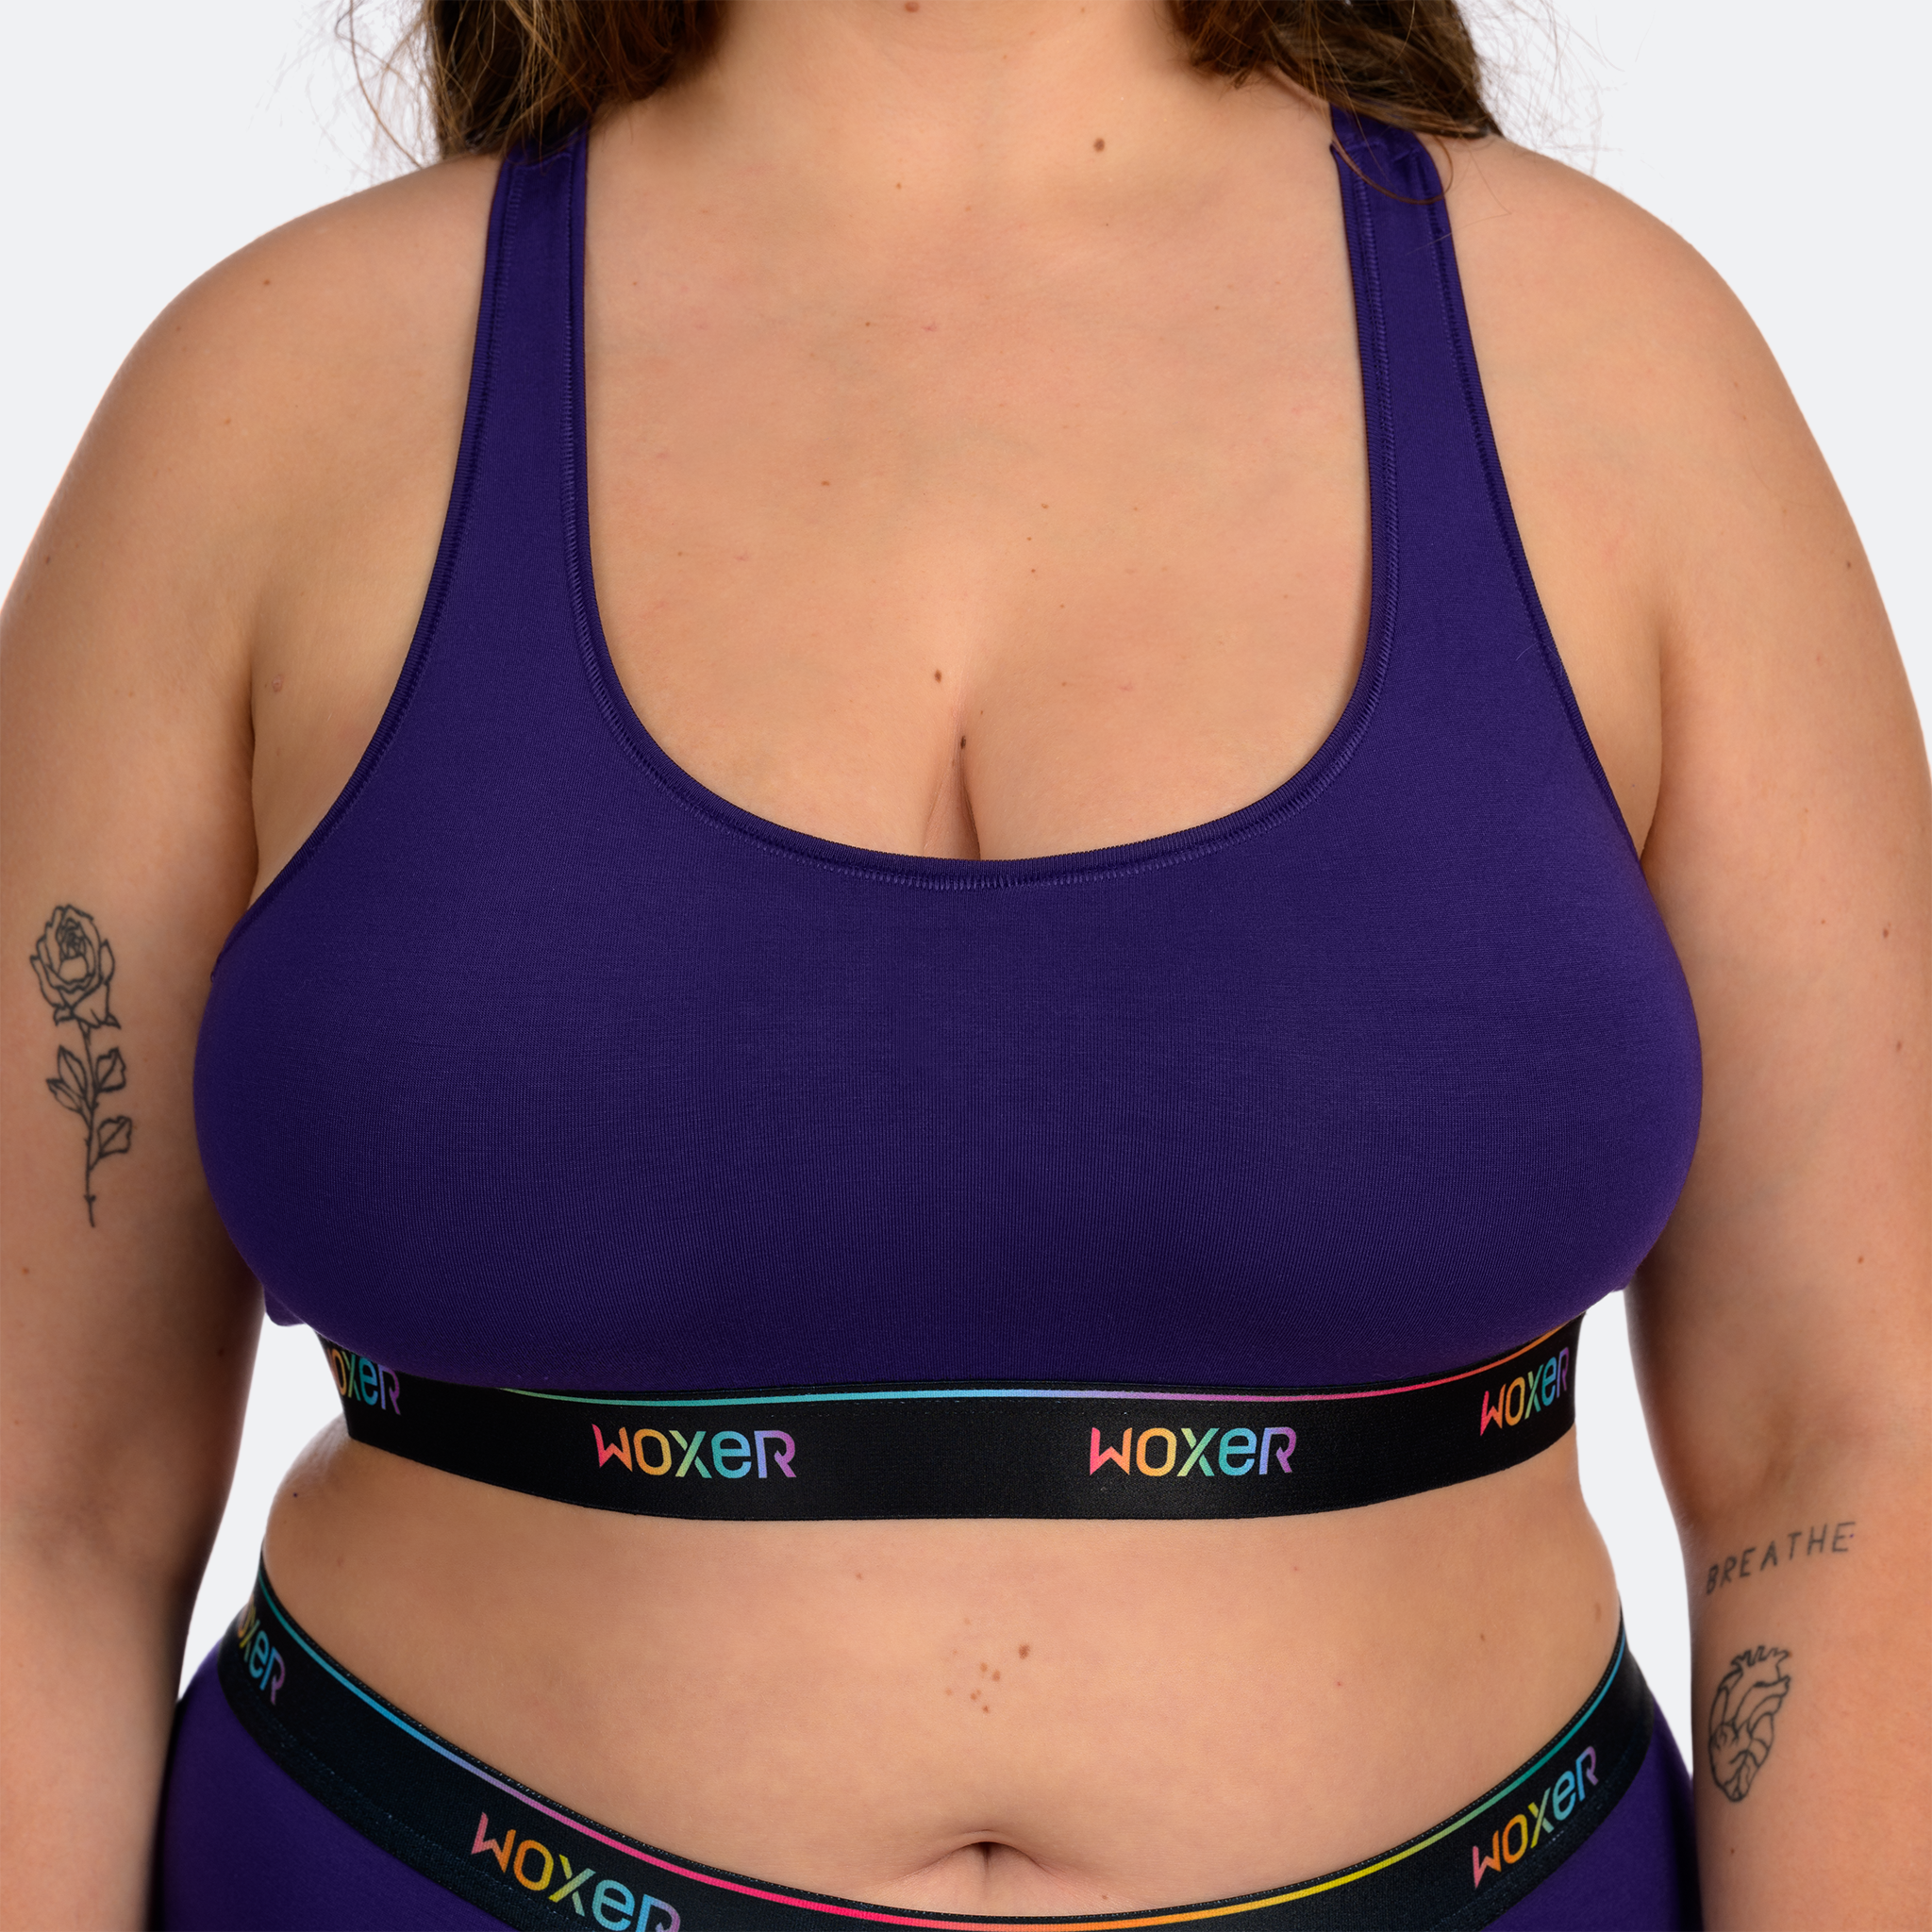 Boss Pride Force | Stretchy Seamless Sports Bras | Woxer